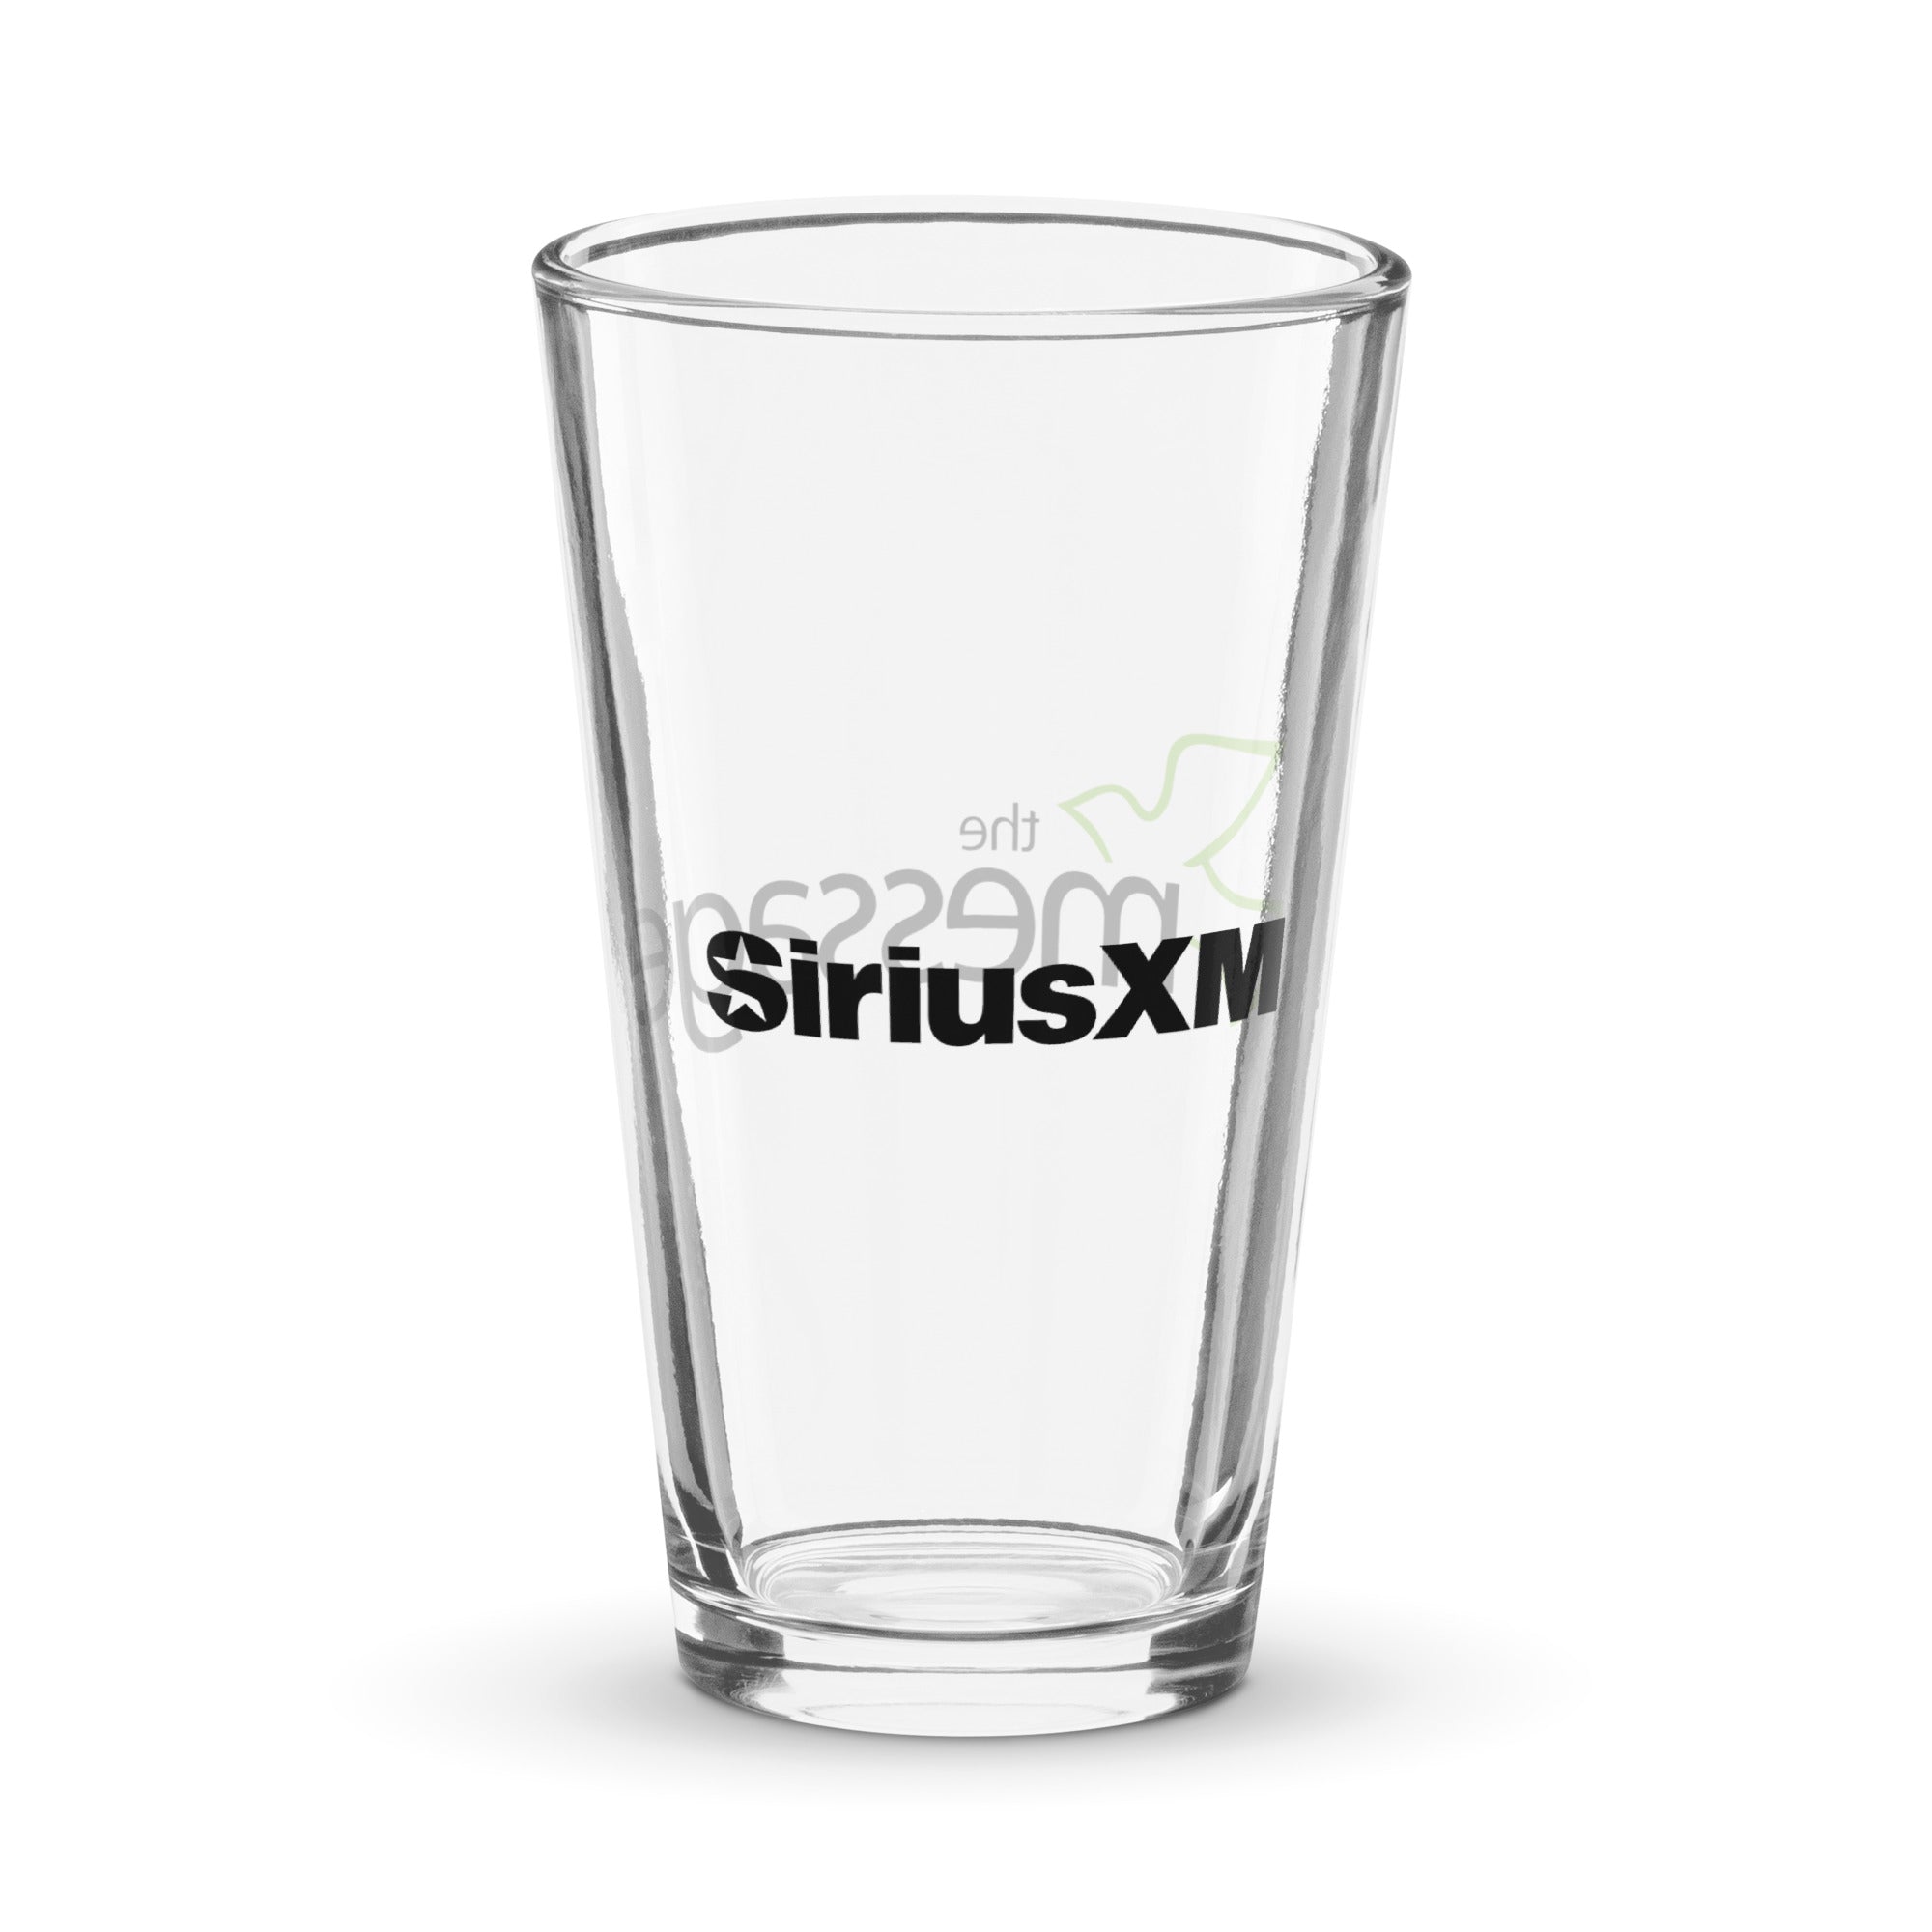 The Message: Pint Glass